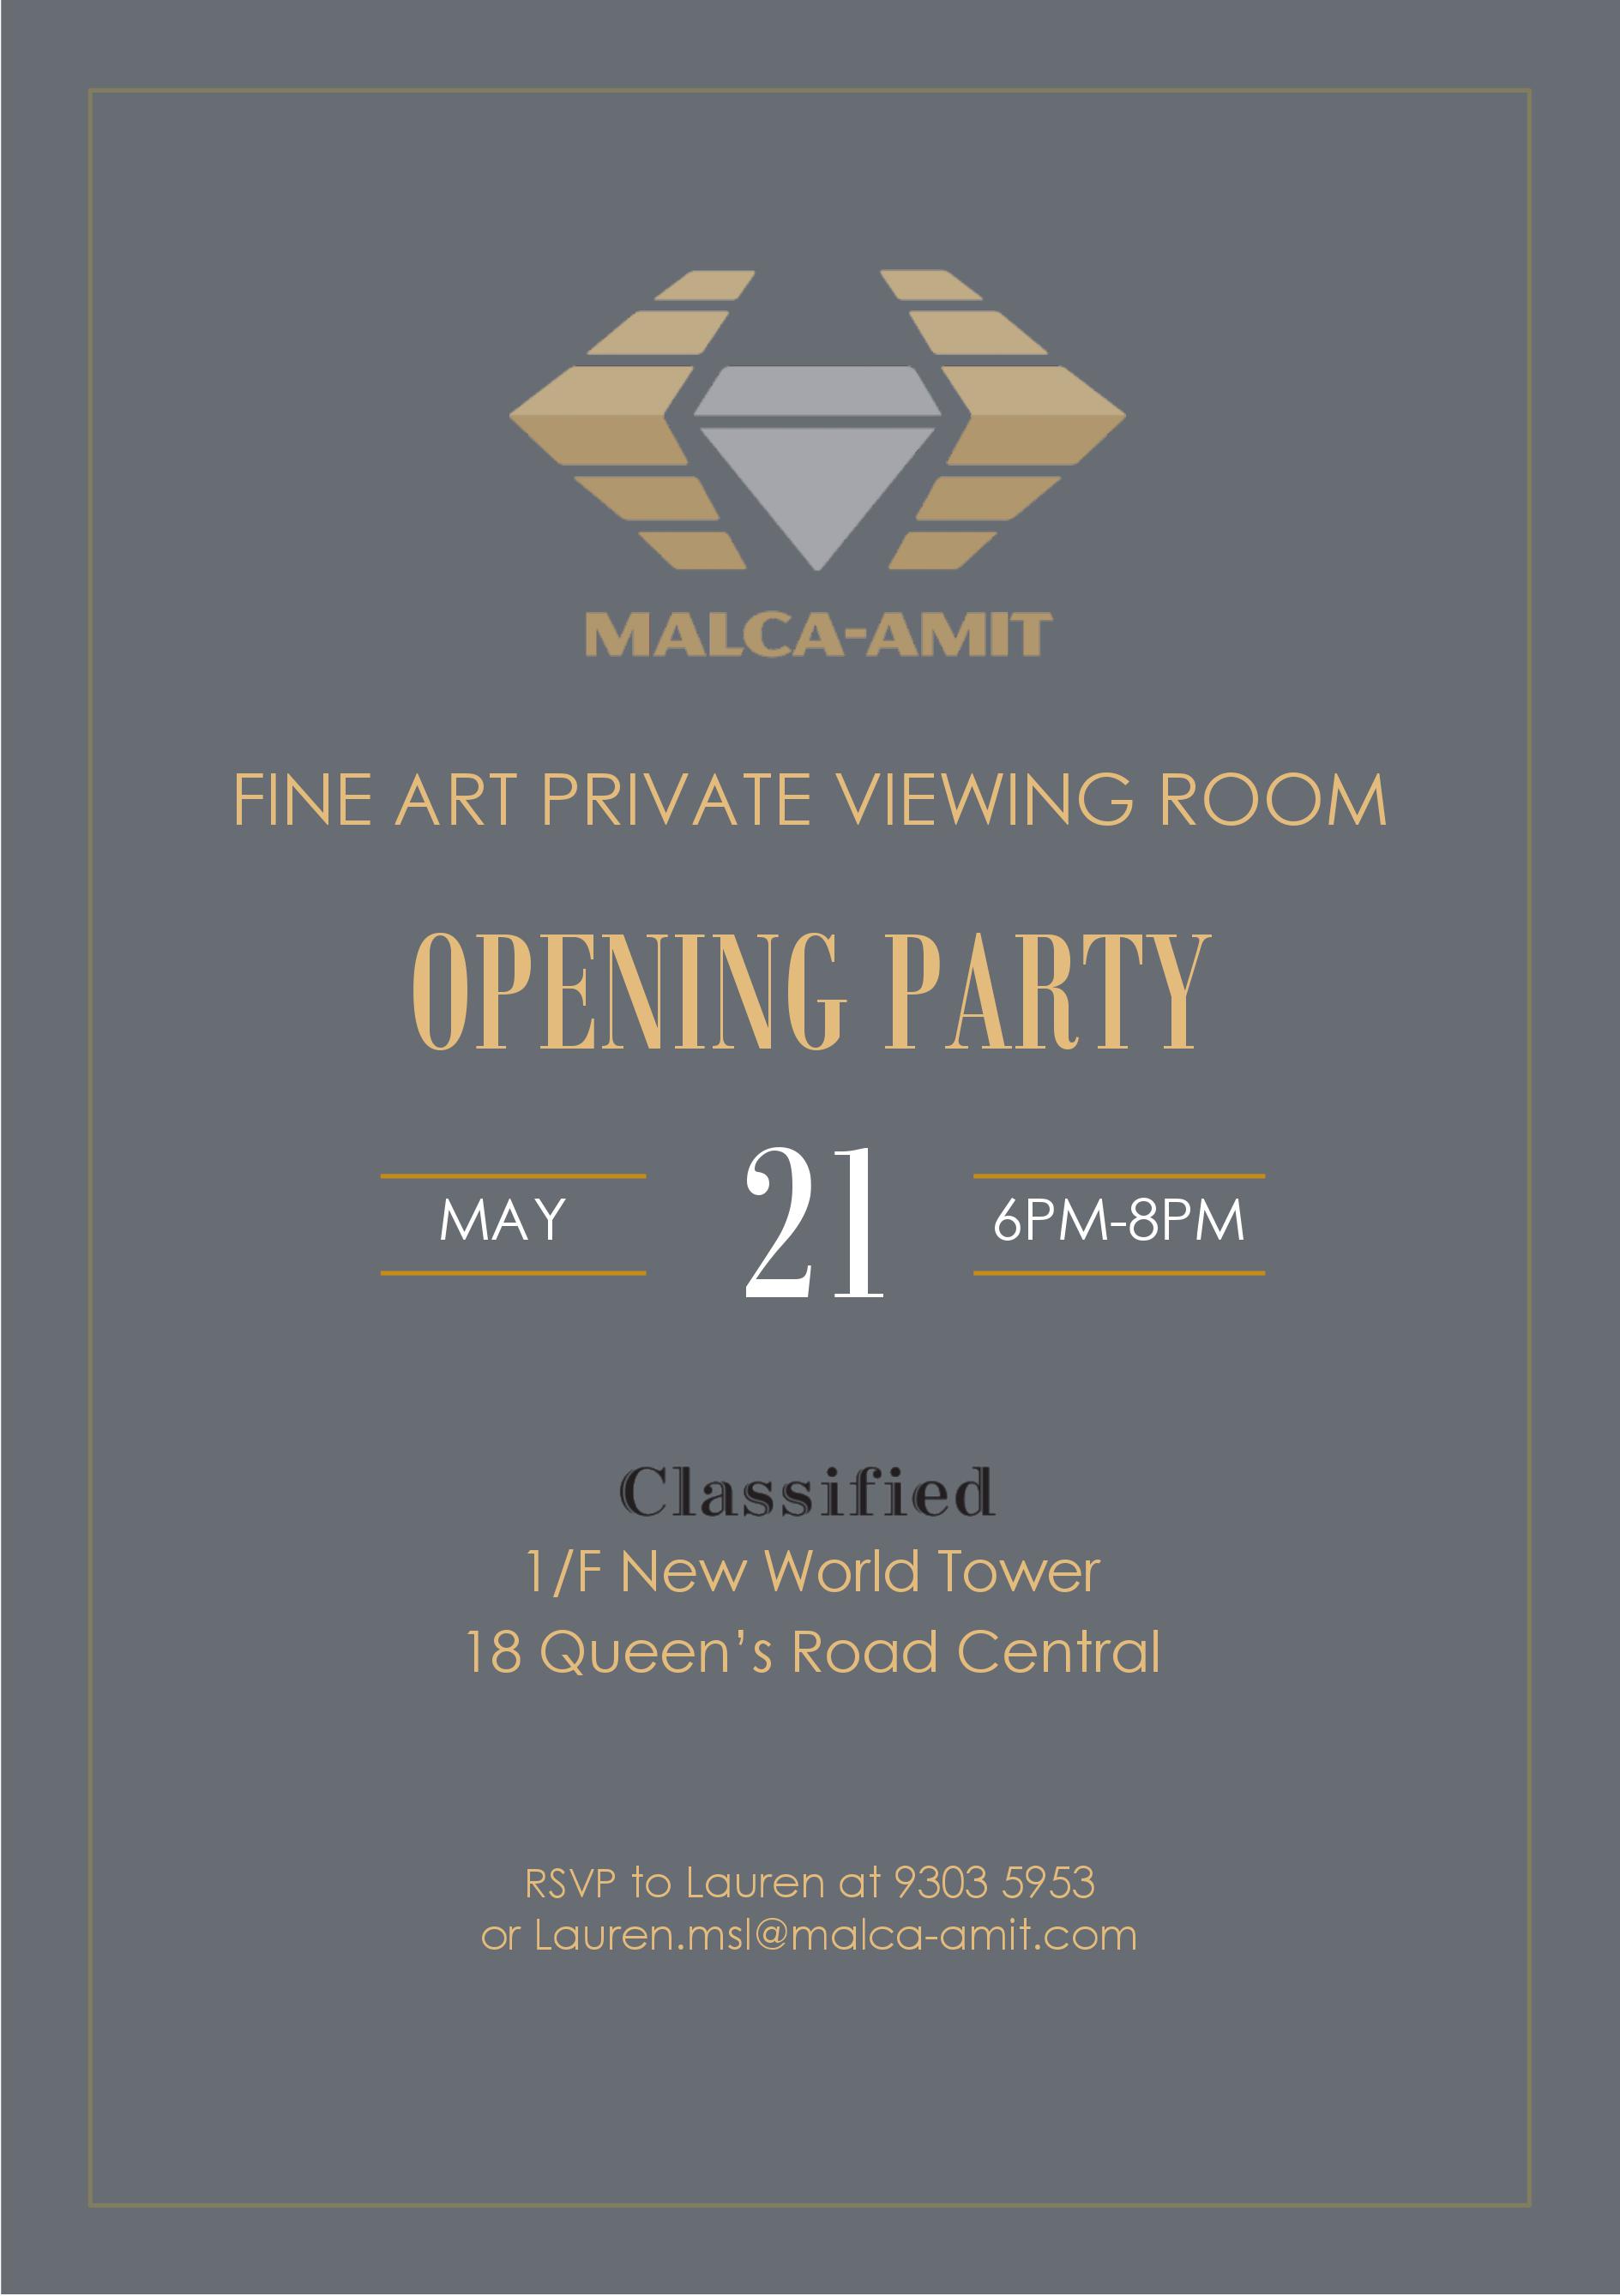 Malca Amit Fine Art Private Viewing Room Opening Party 21